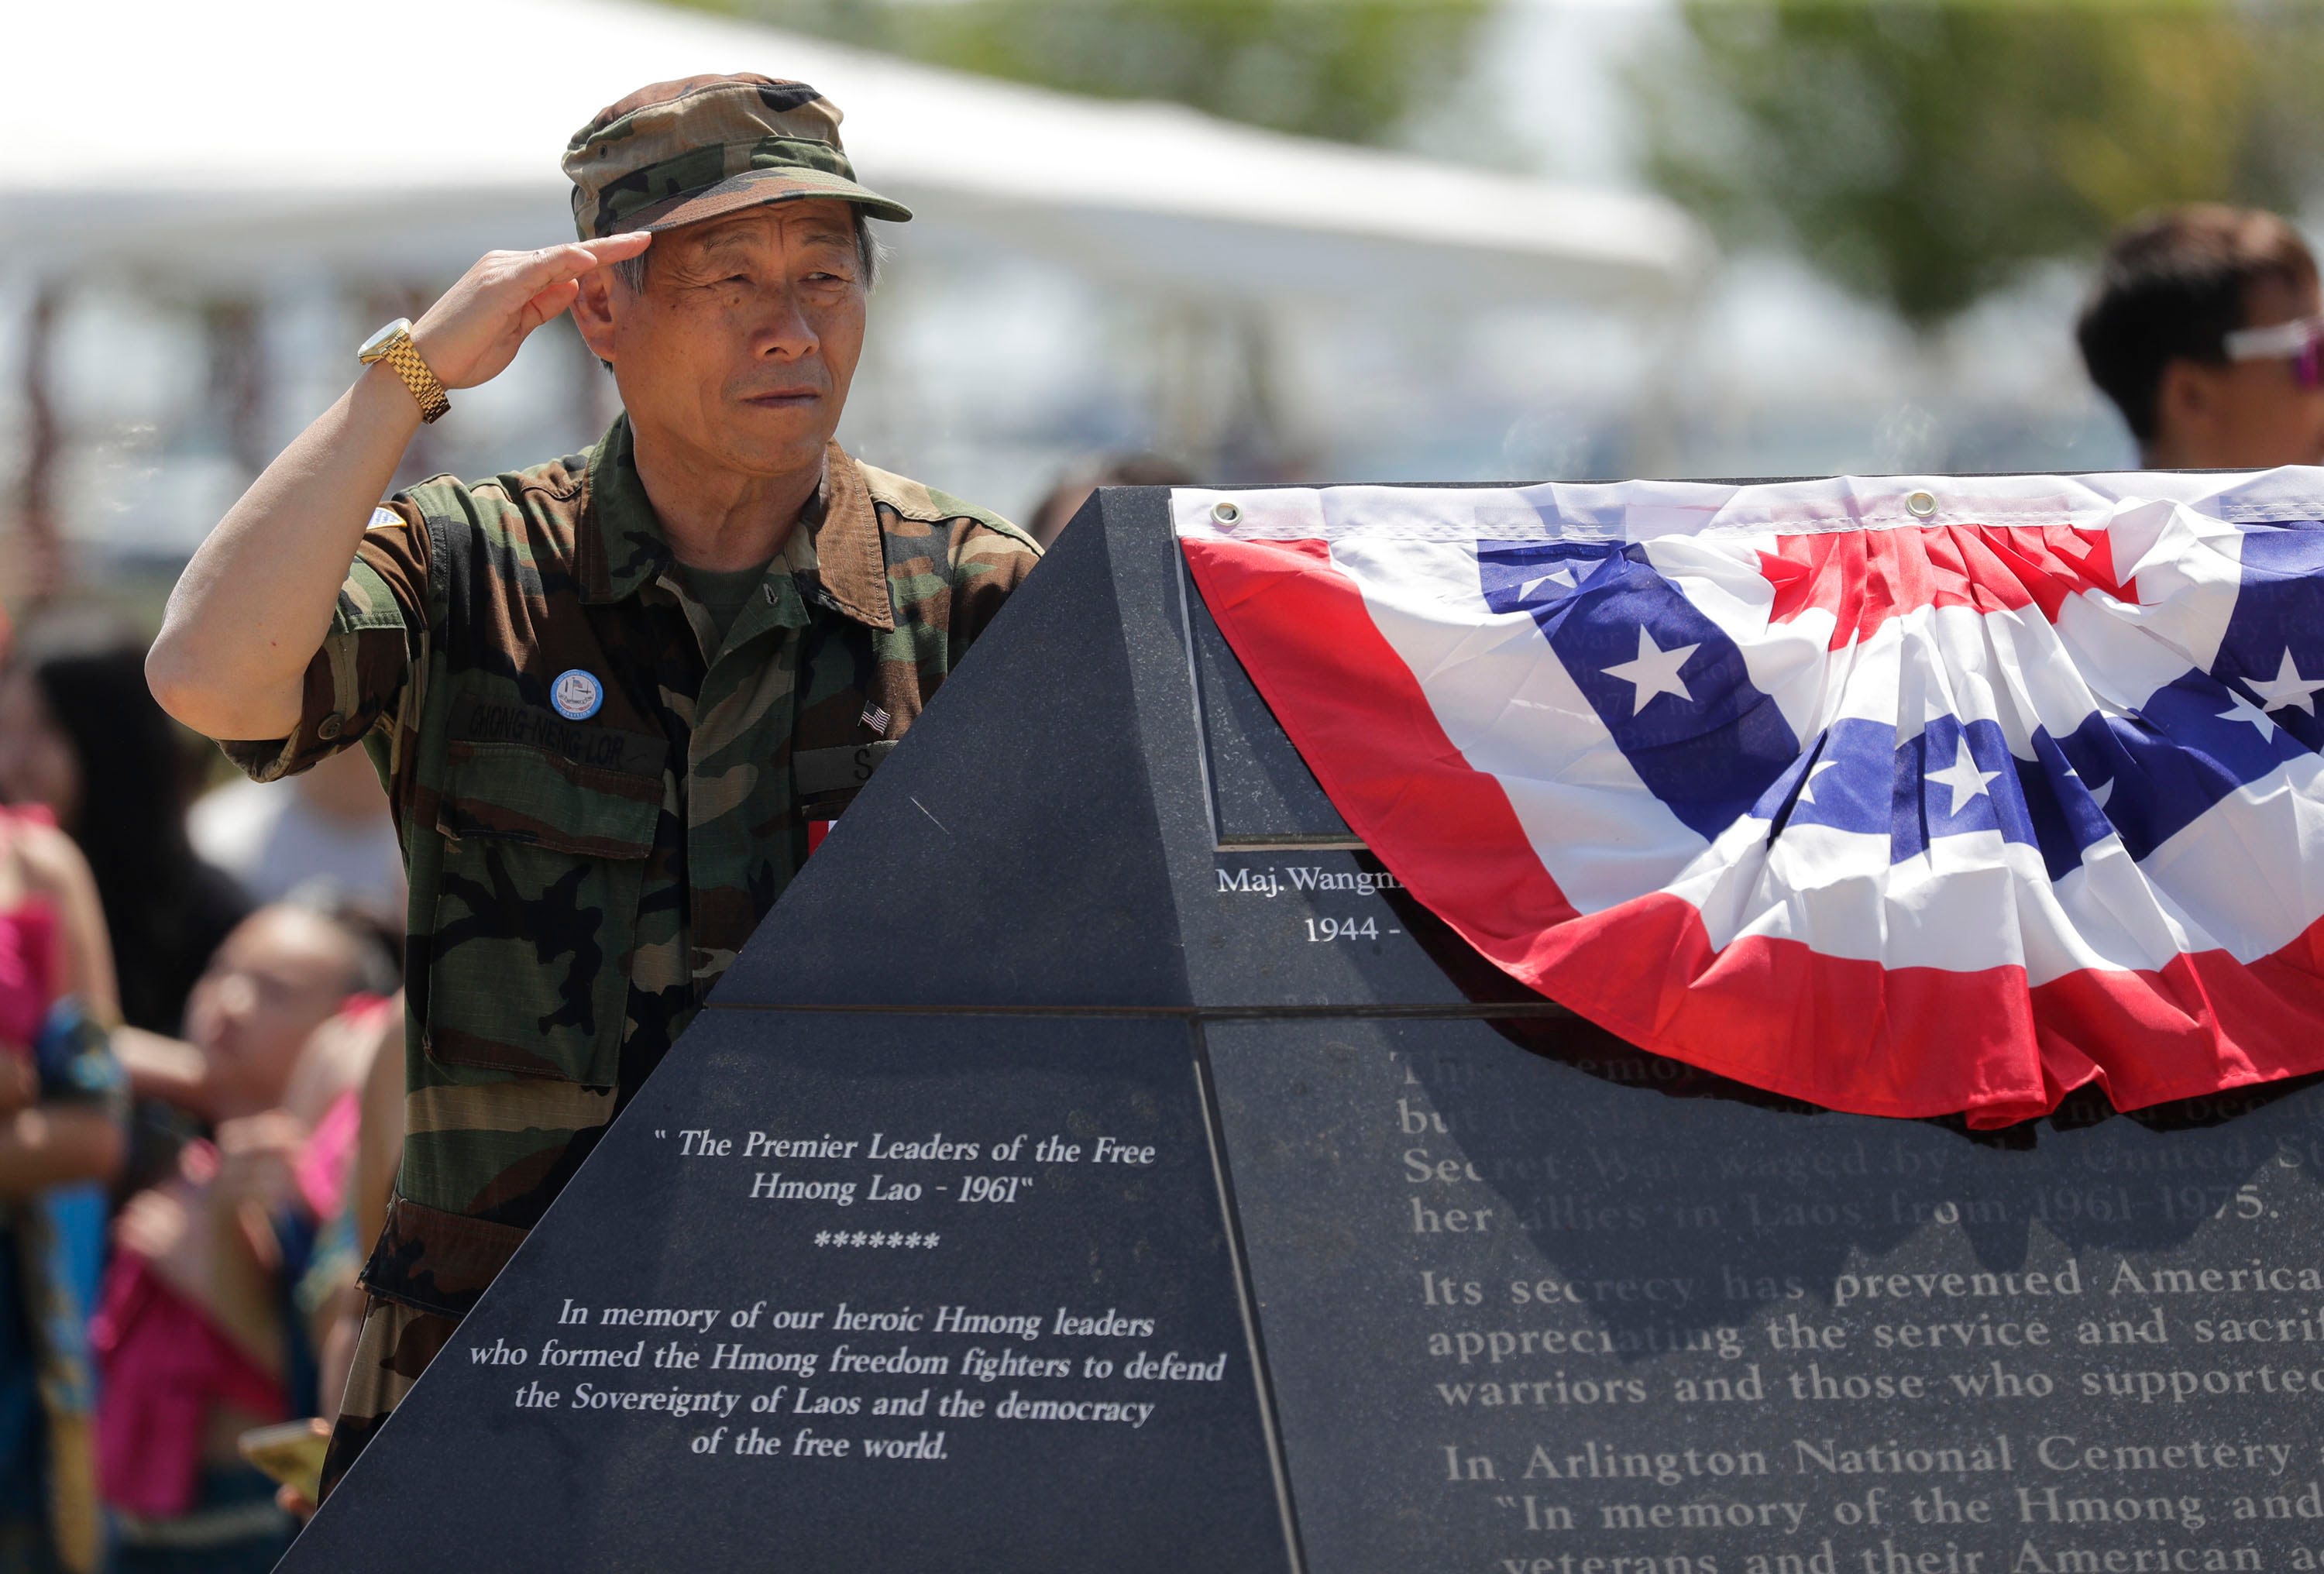 Sheboygan South High students to honor Hmong veterans, culture with community presentation